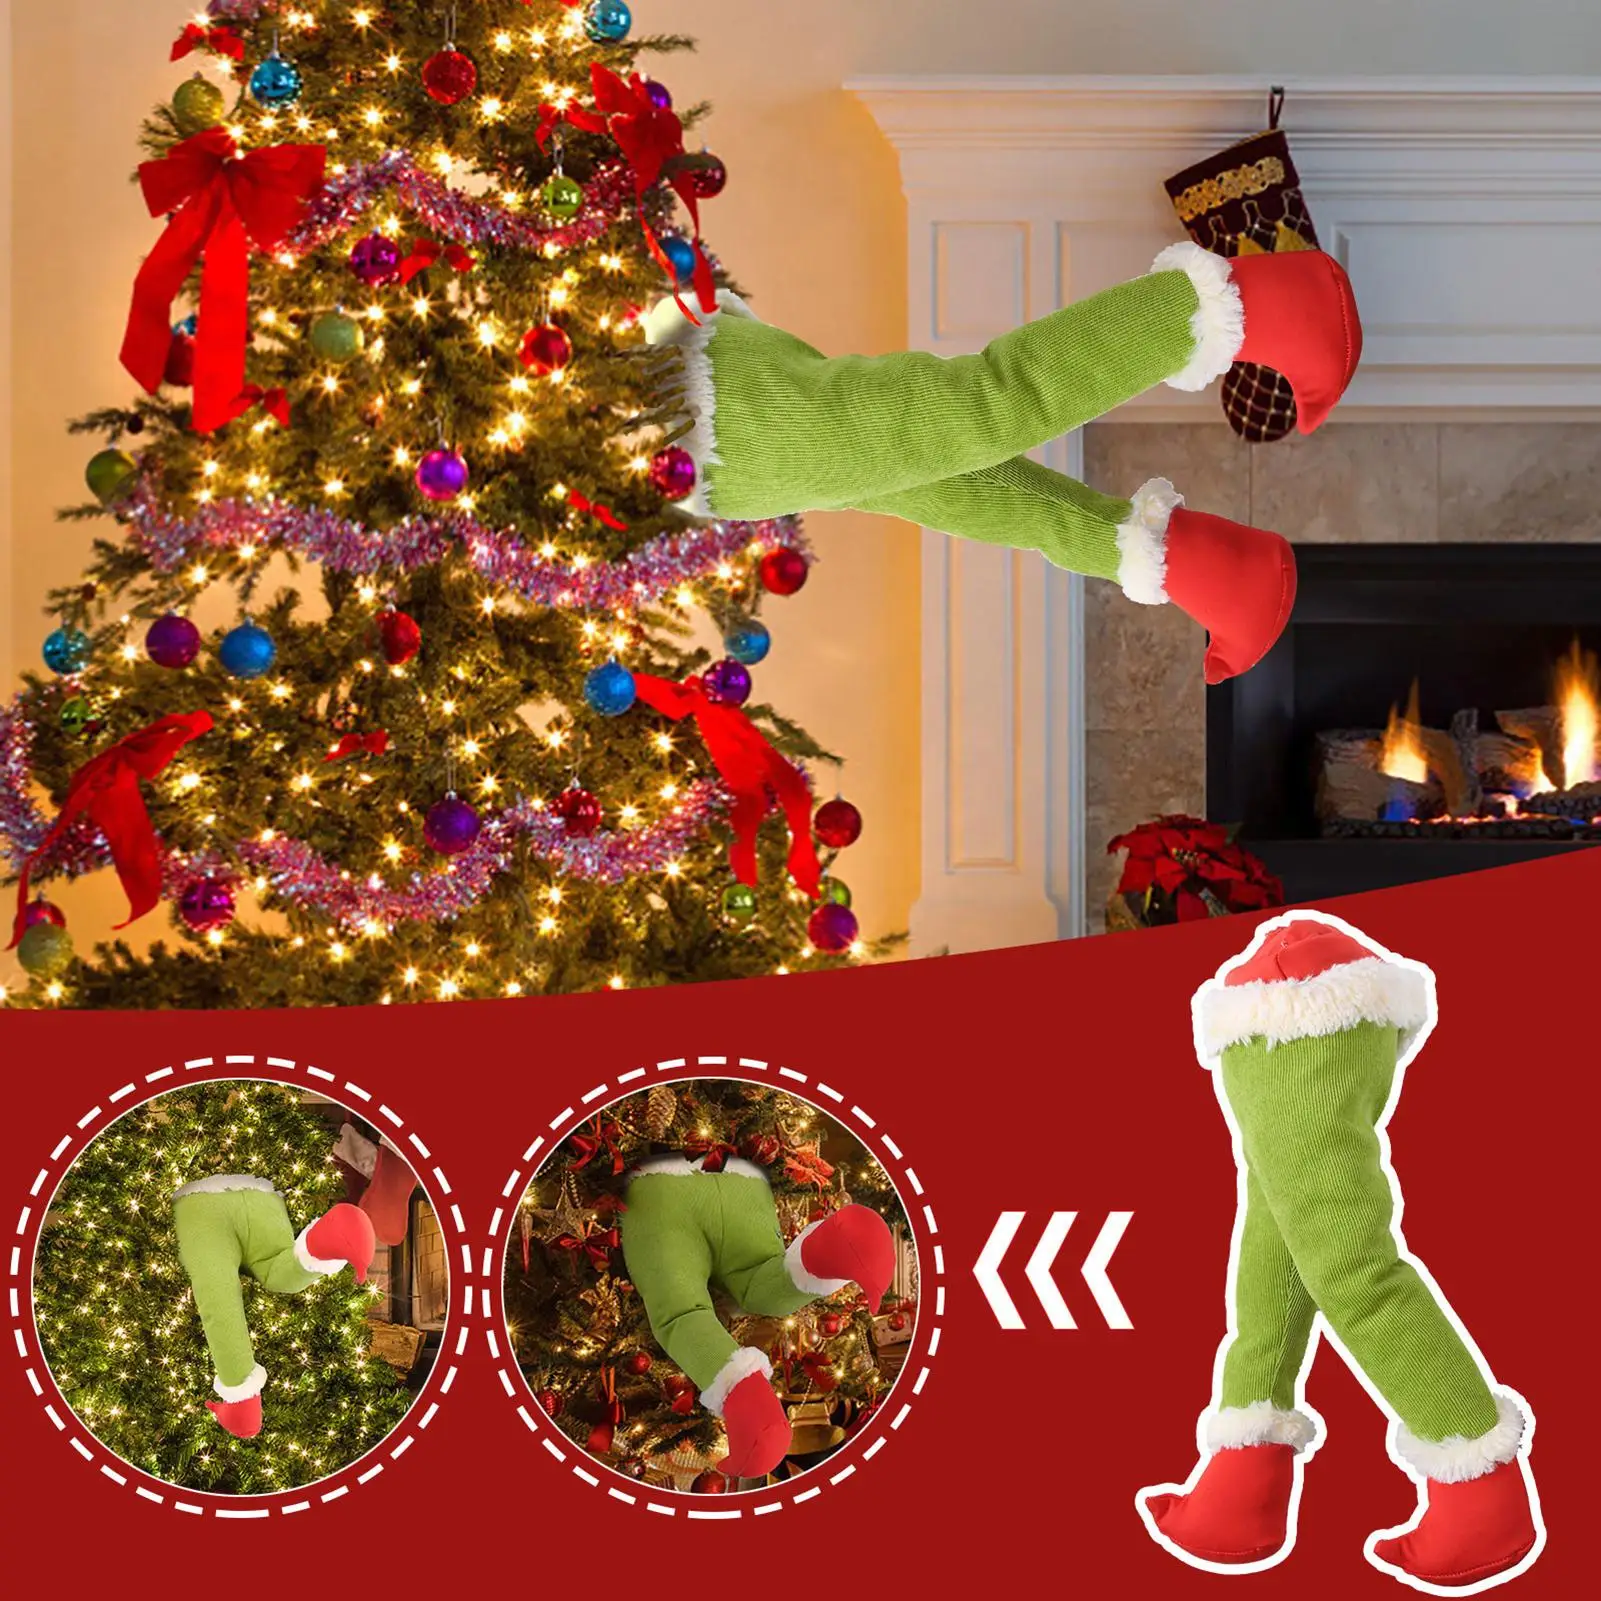 CHRISTMAS DECORATE LIKE A PRO! HOW TO DIY GRINCH LEGS FOR YOUR